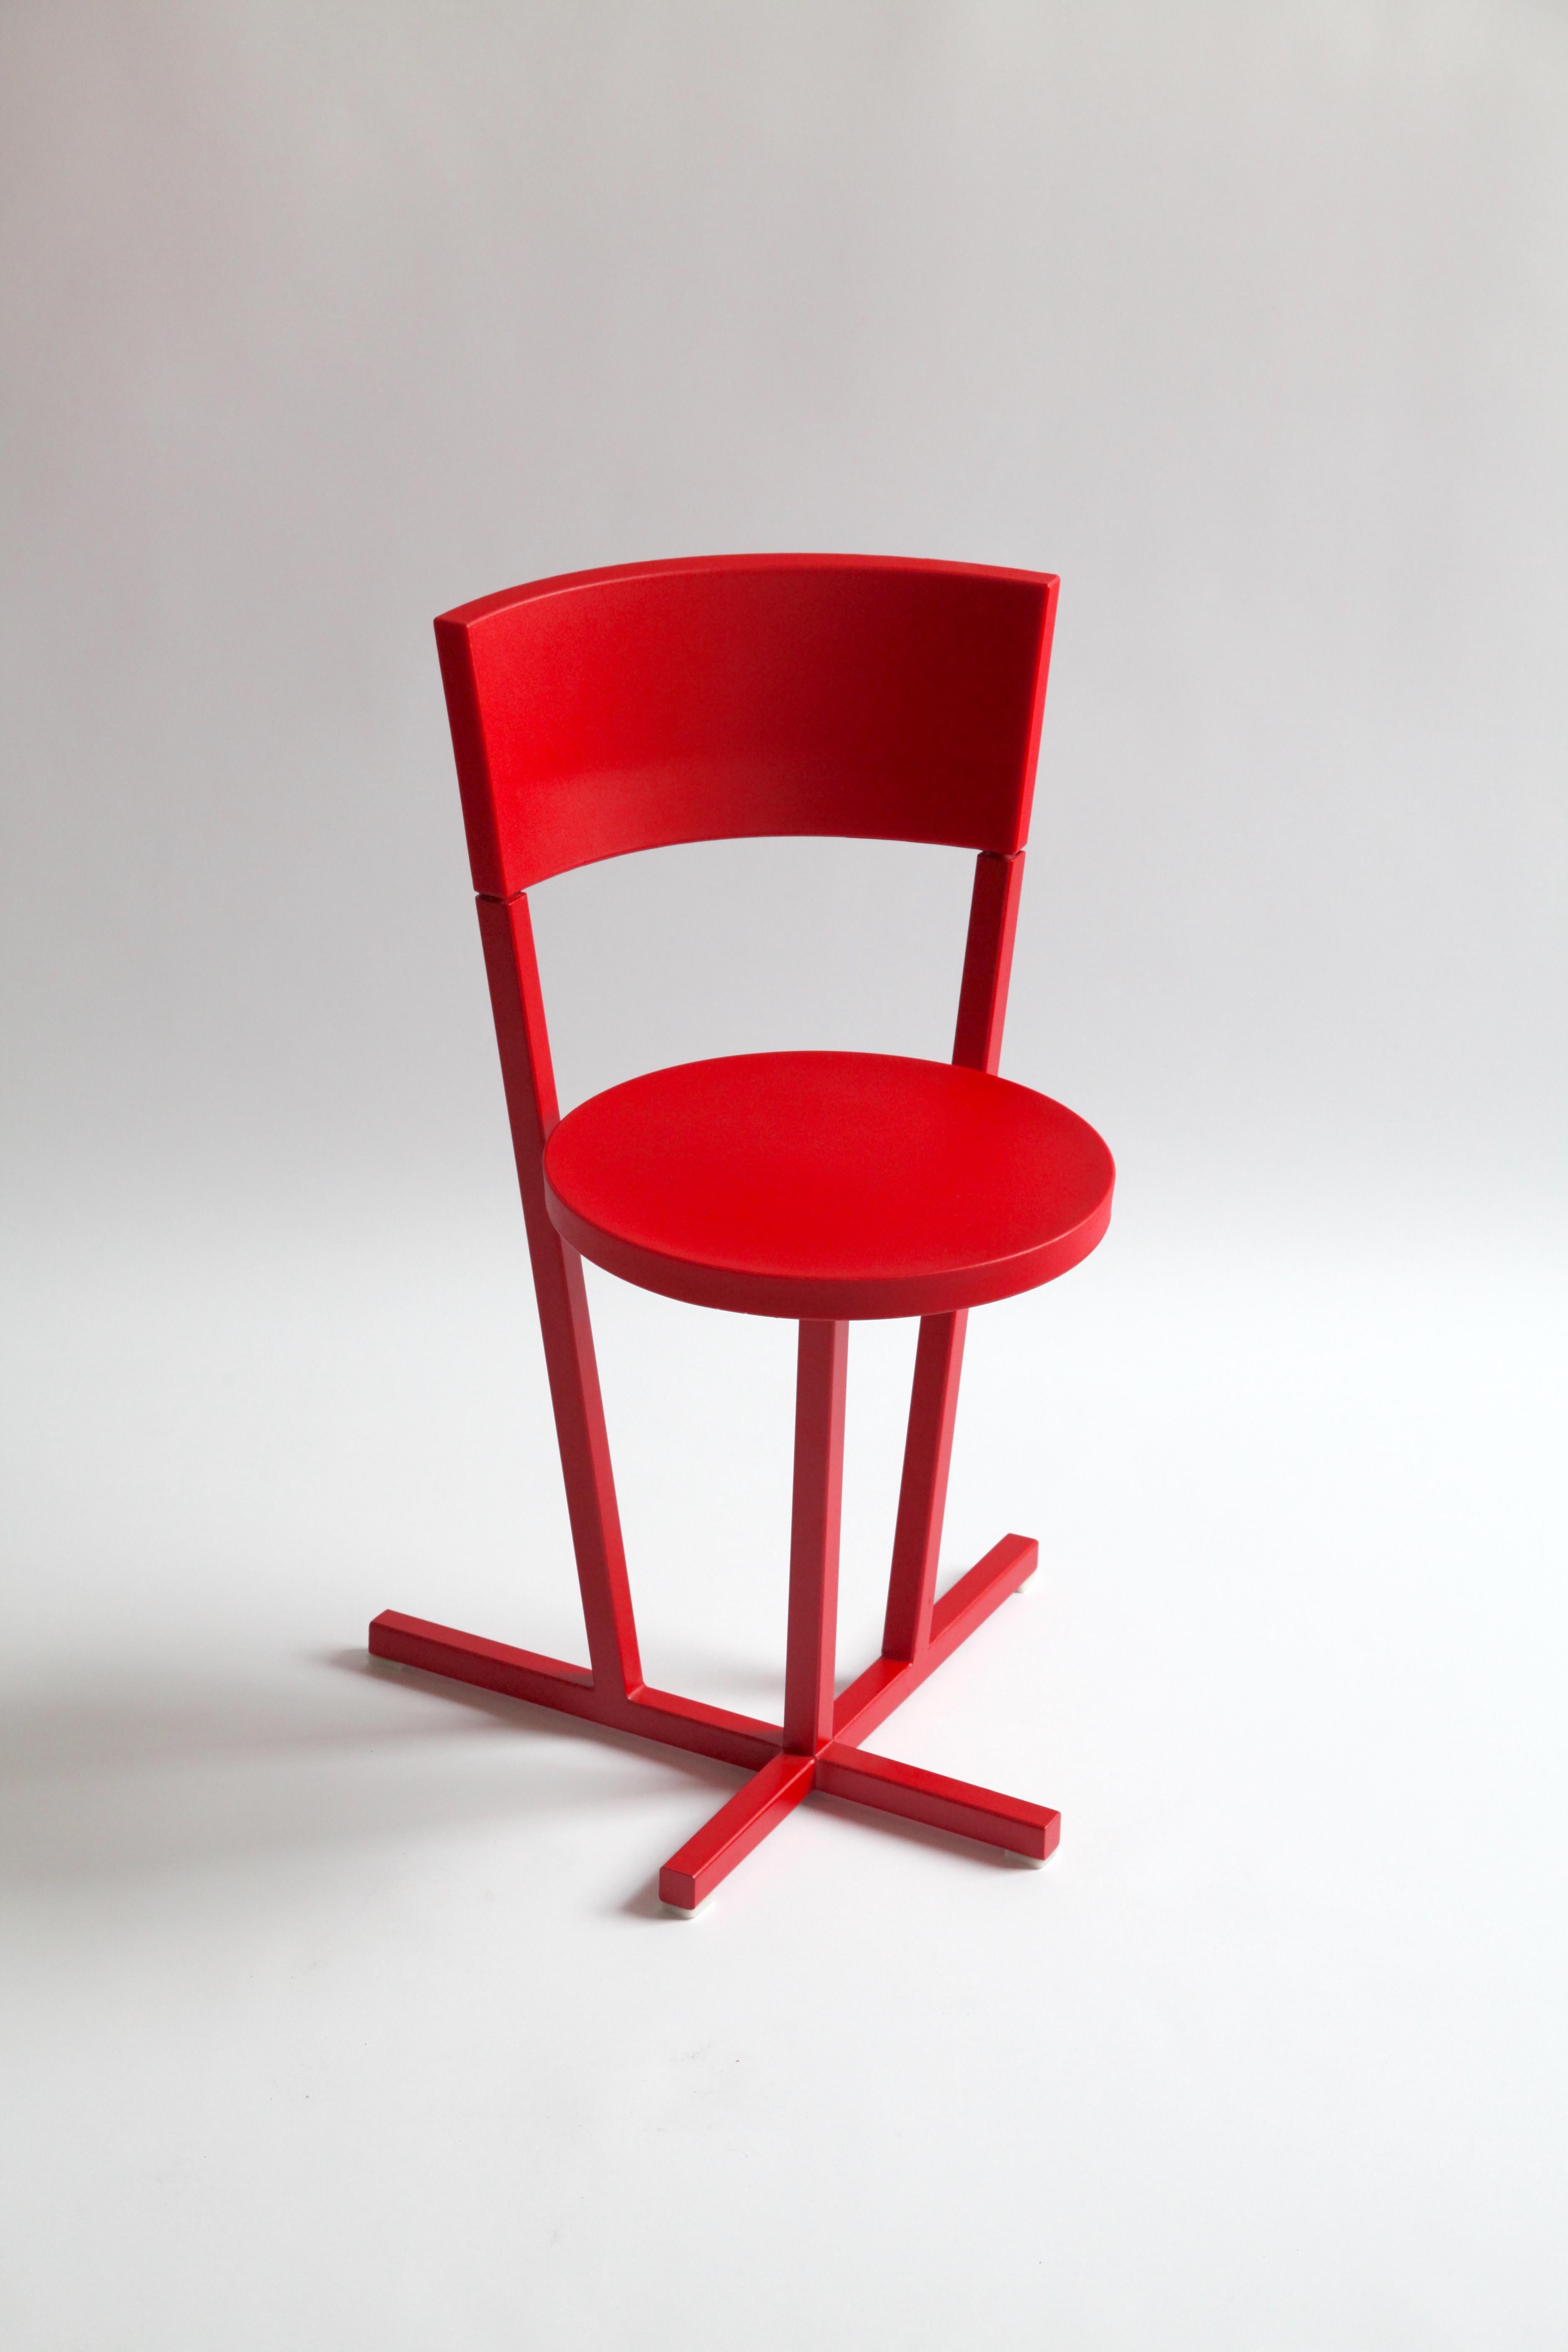 This prototype Stedelijk Chair was designed for the Stedelijk Museum in Amsterdam. 

The chair is not produced because of director change at the Stedelijk Museum.
A few prototypes are made and one of them is in in collection of Stedelijk